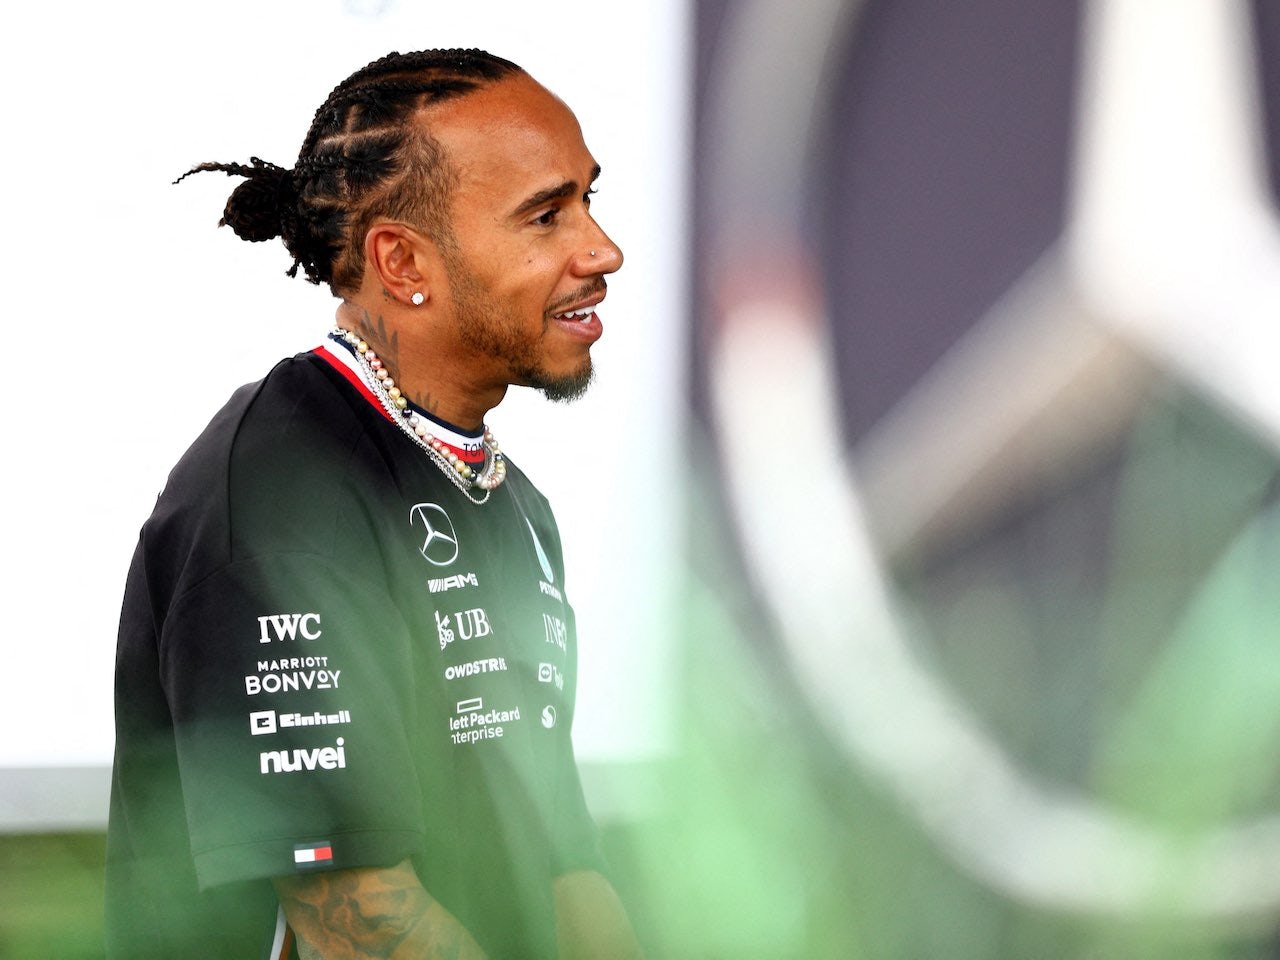 New contract could take another 'month' - Hamilton